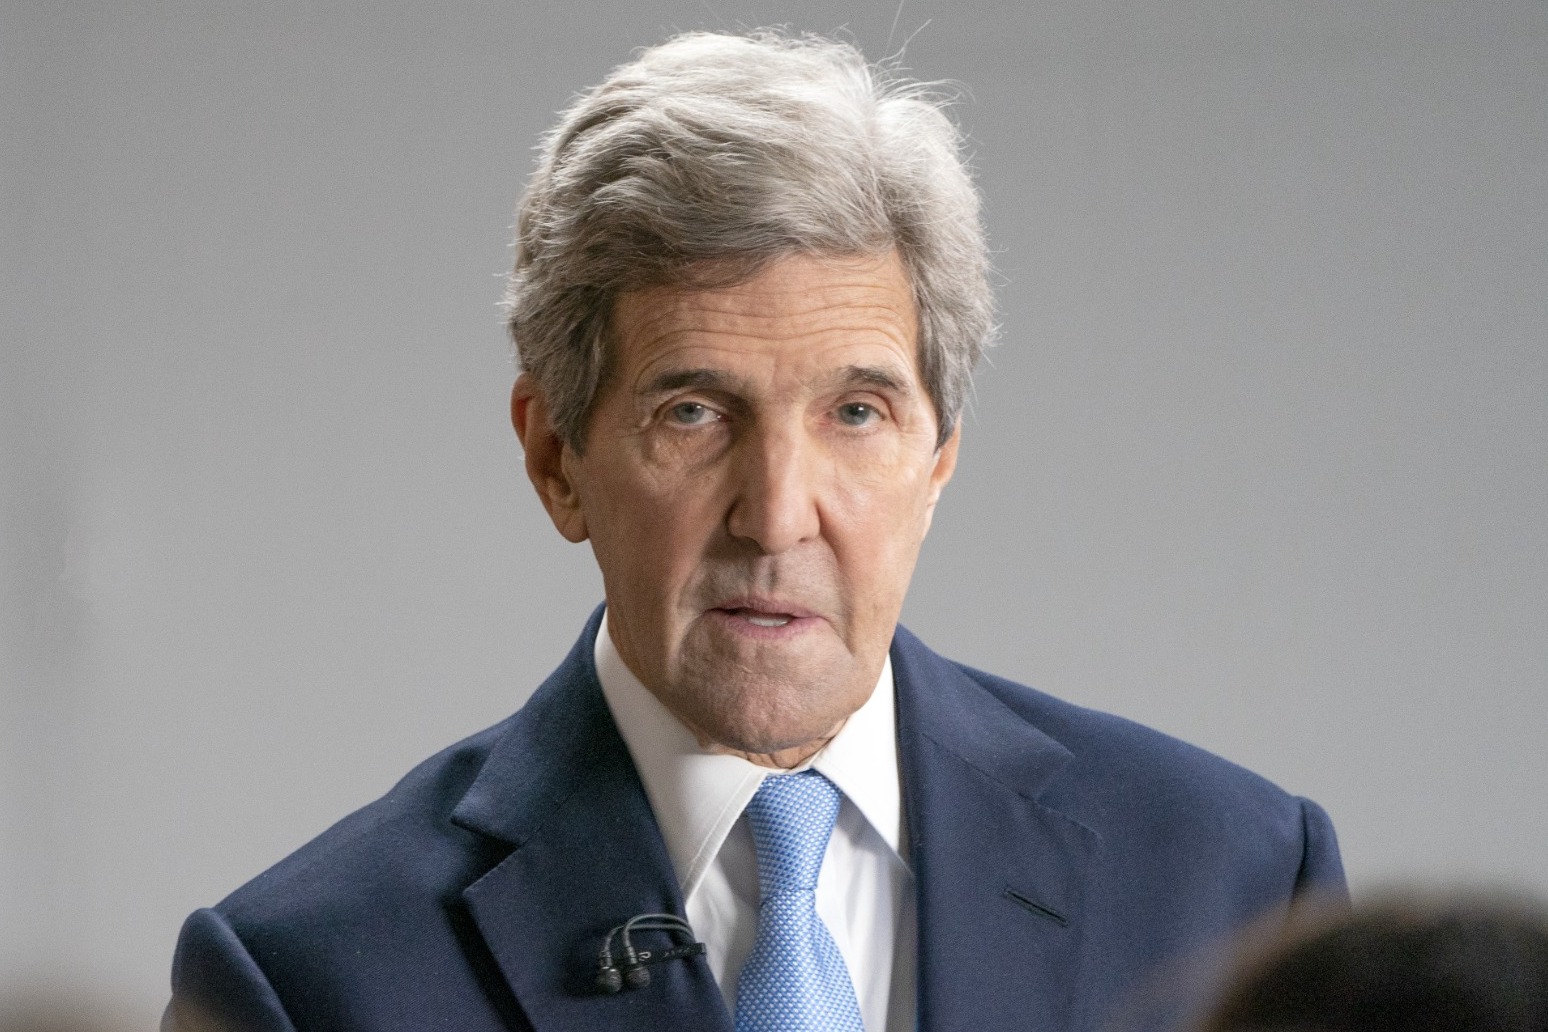 Kerry warns governments are falling short on climate efforts 